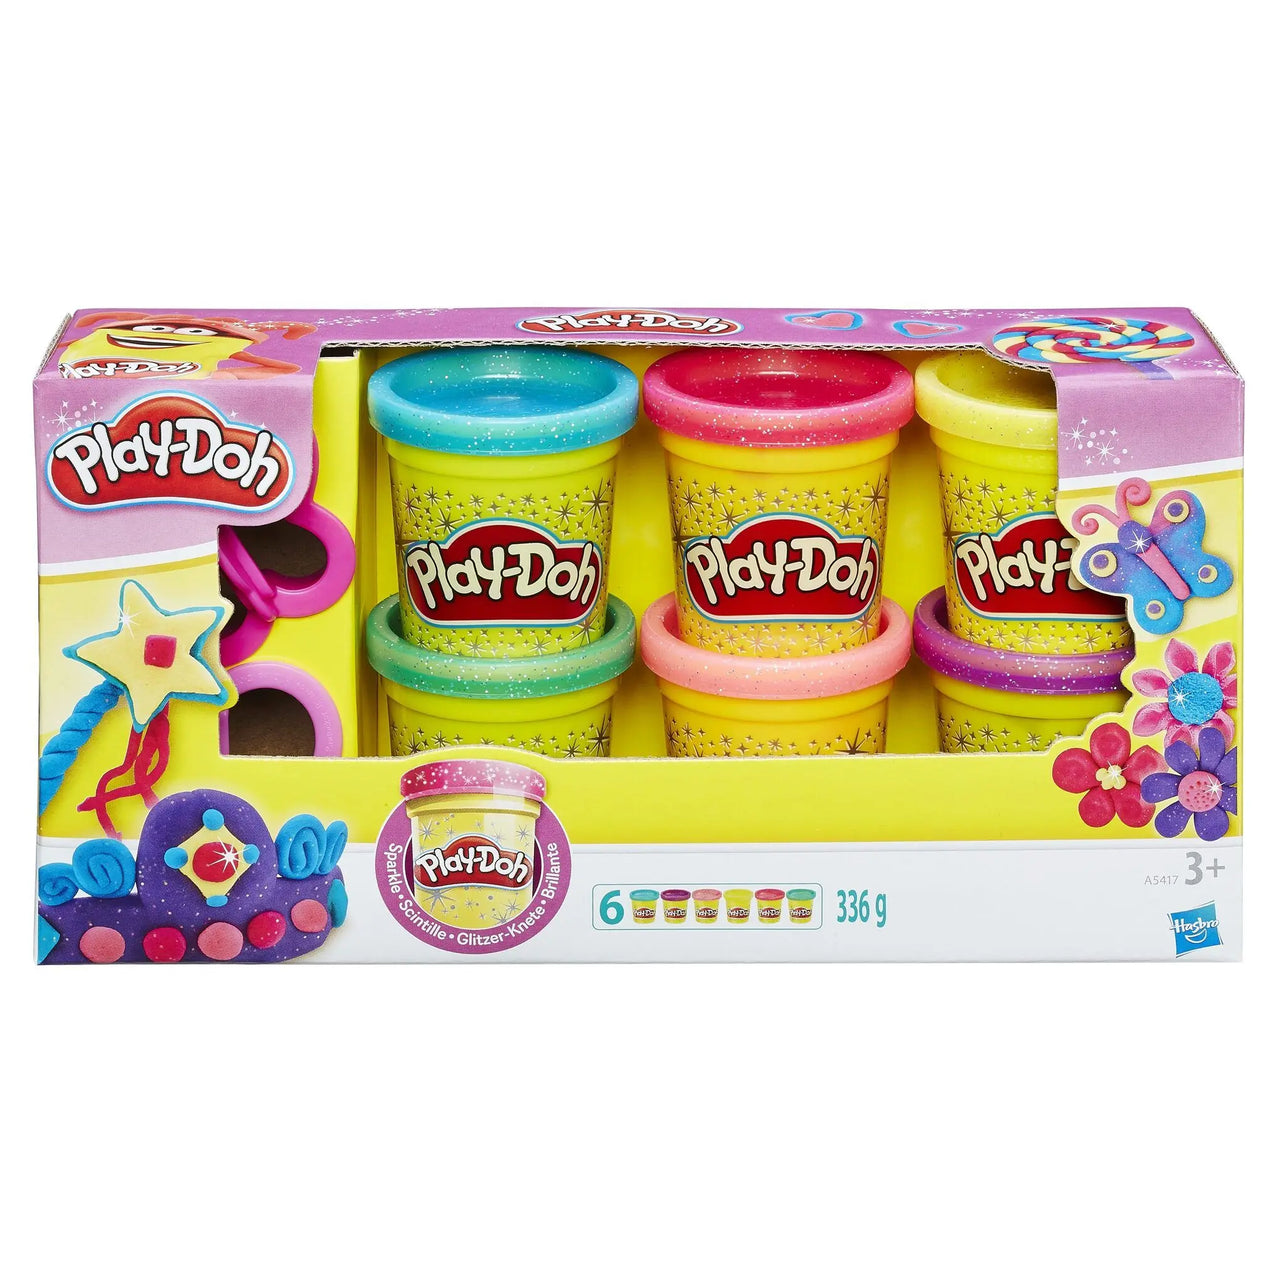 Play-Doh Sparkle Compound Collection 6 Pack Play-Doh